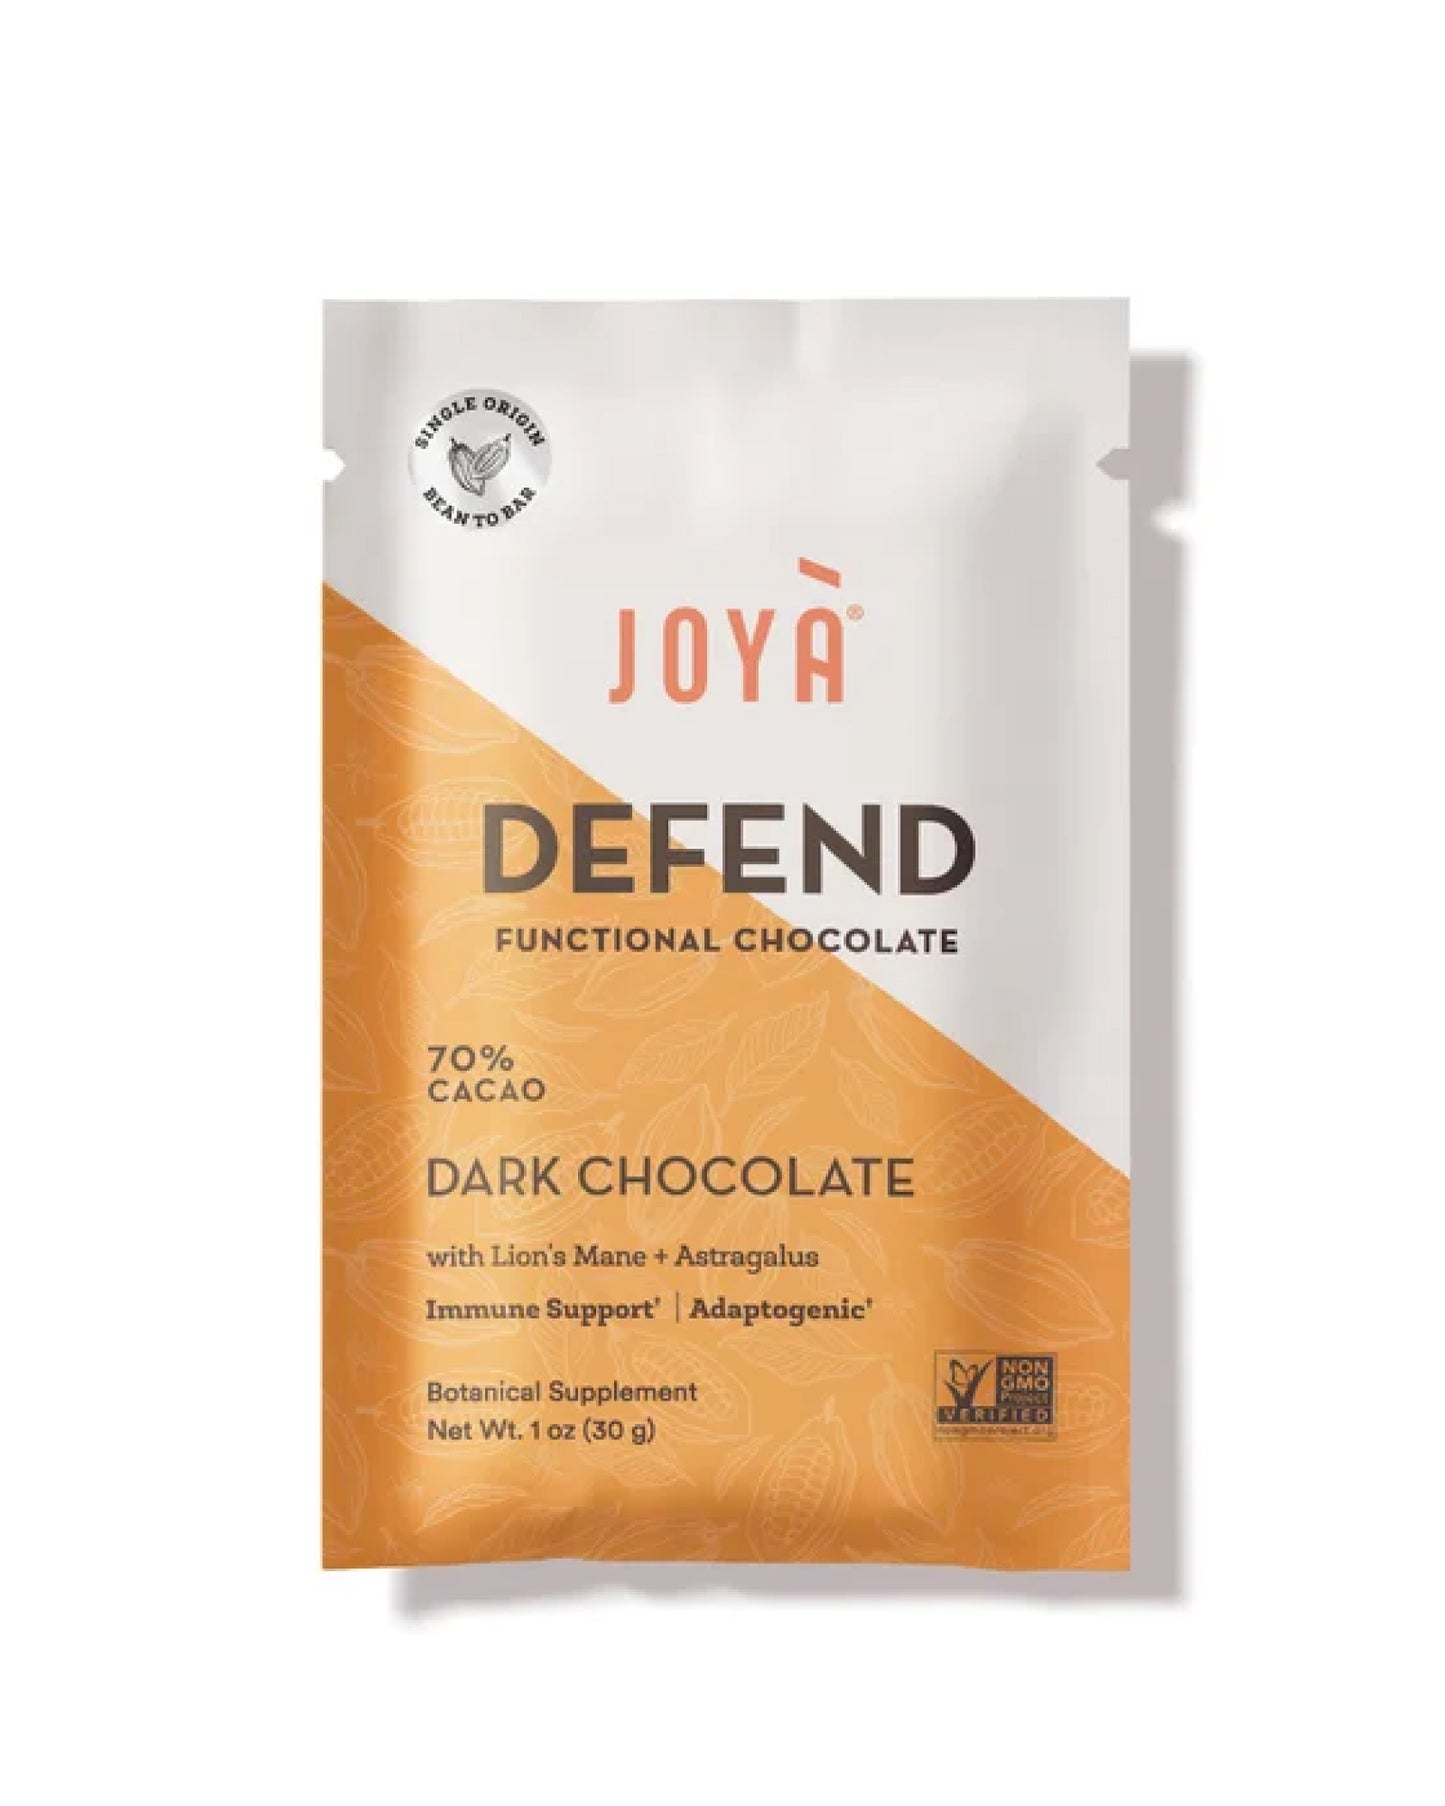 Defend 70% Cacao Functional Dark Chocolate